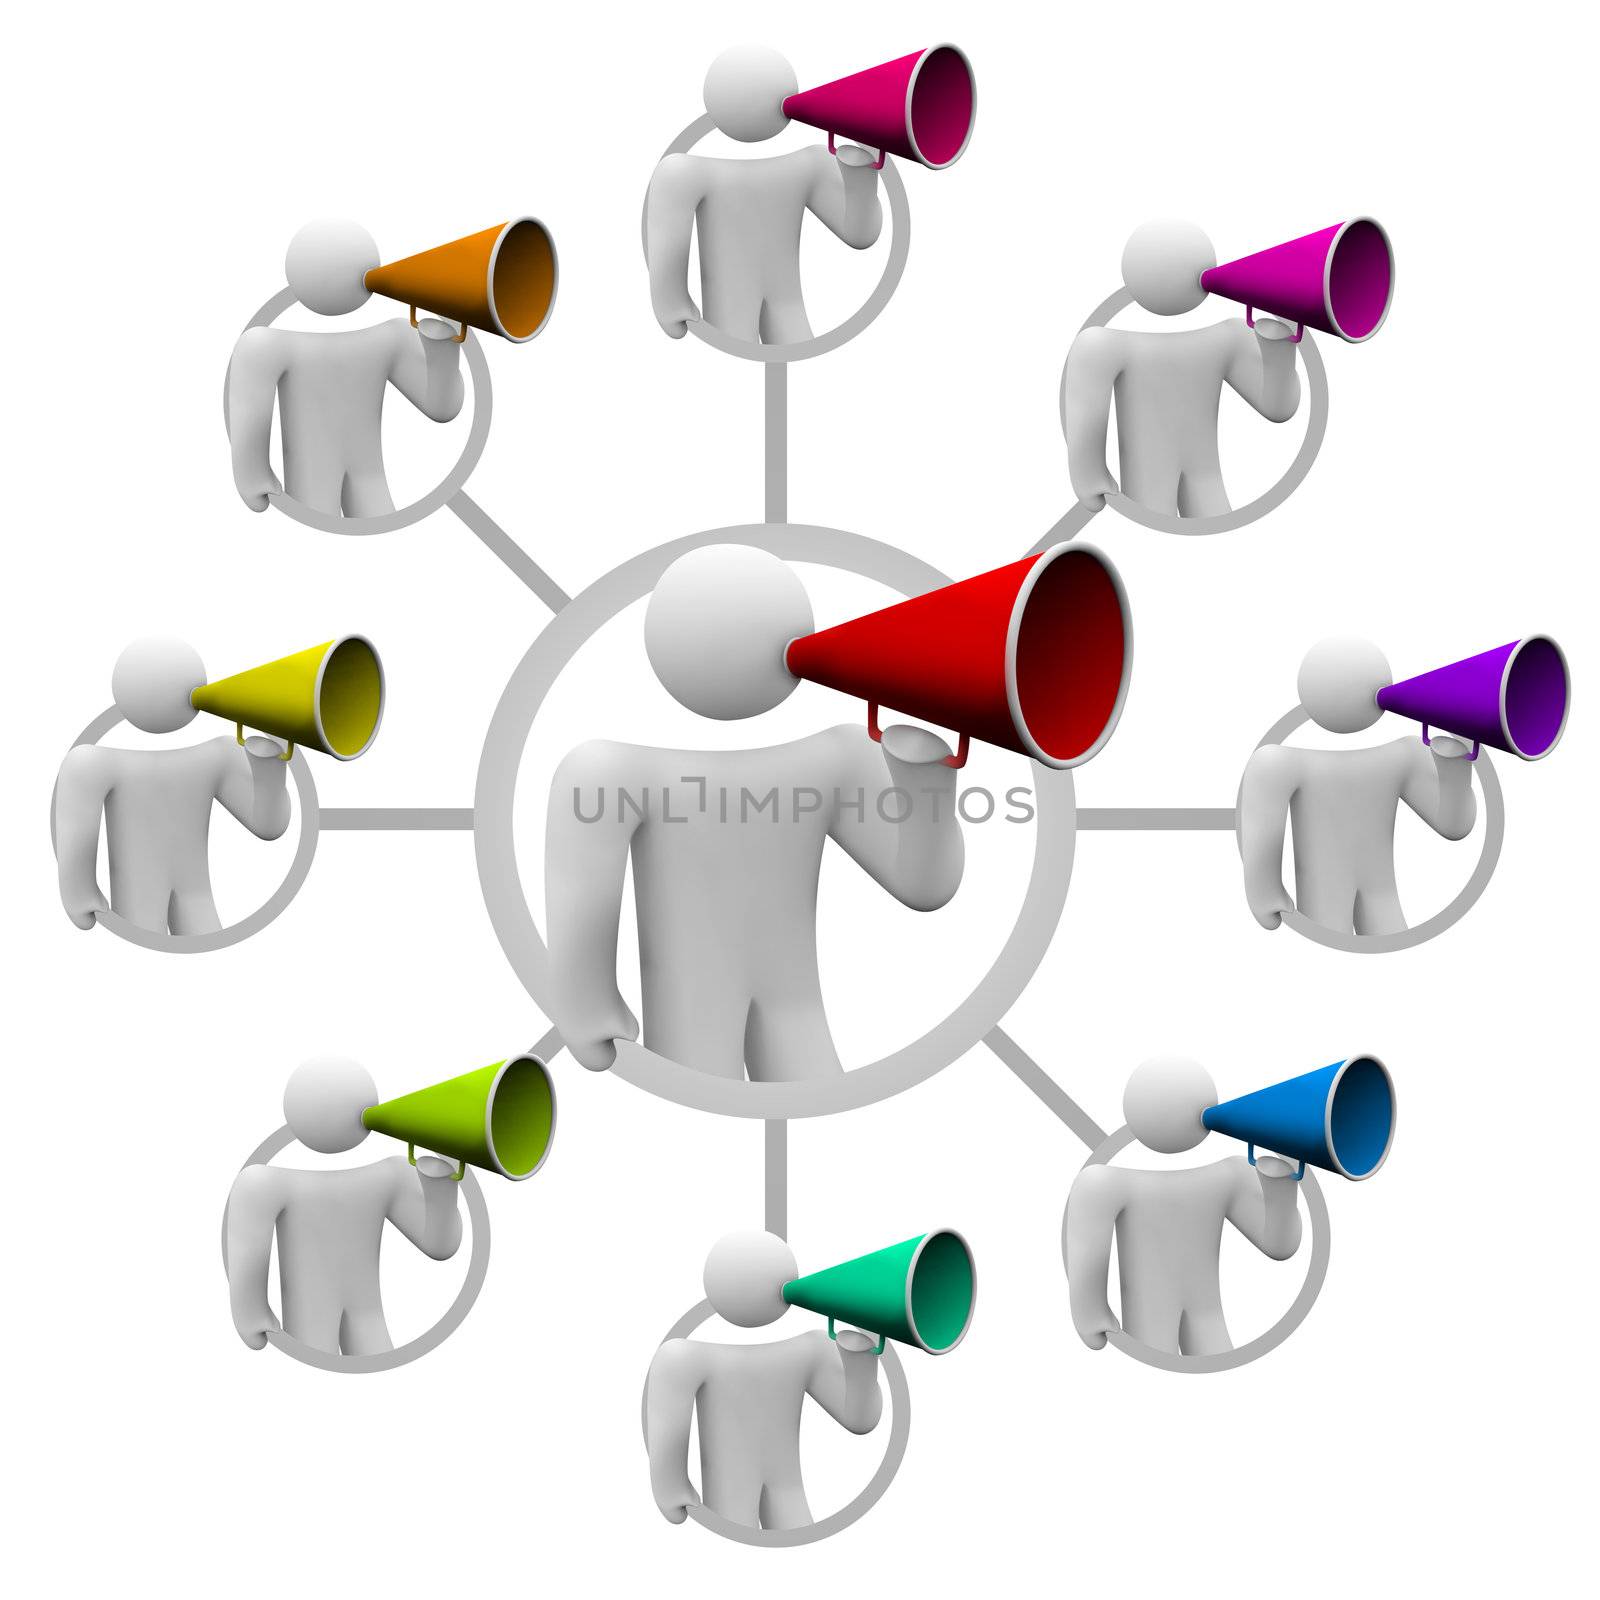 Bullhorn People Spreading the Word in Communication Network by iQoncept